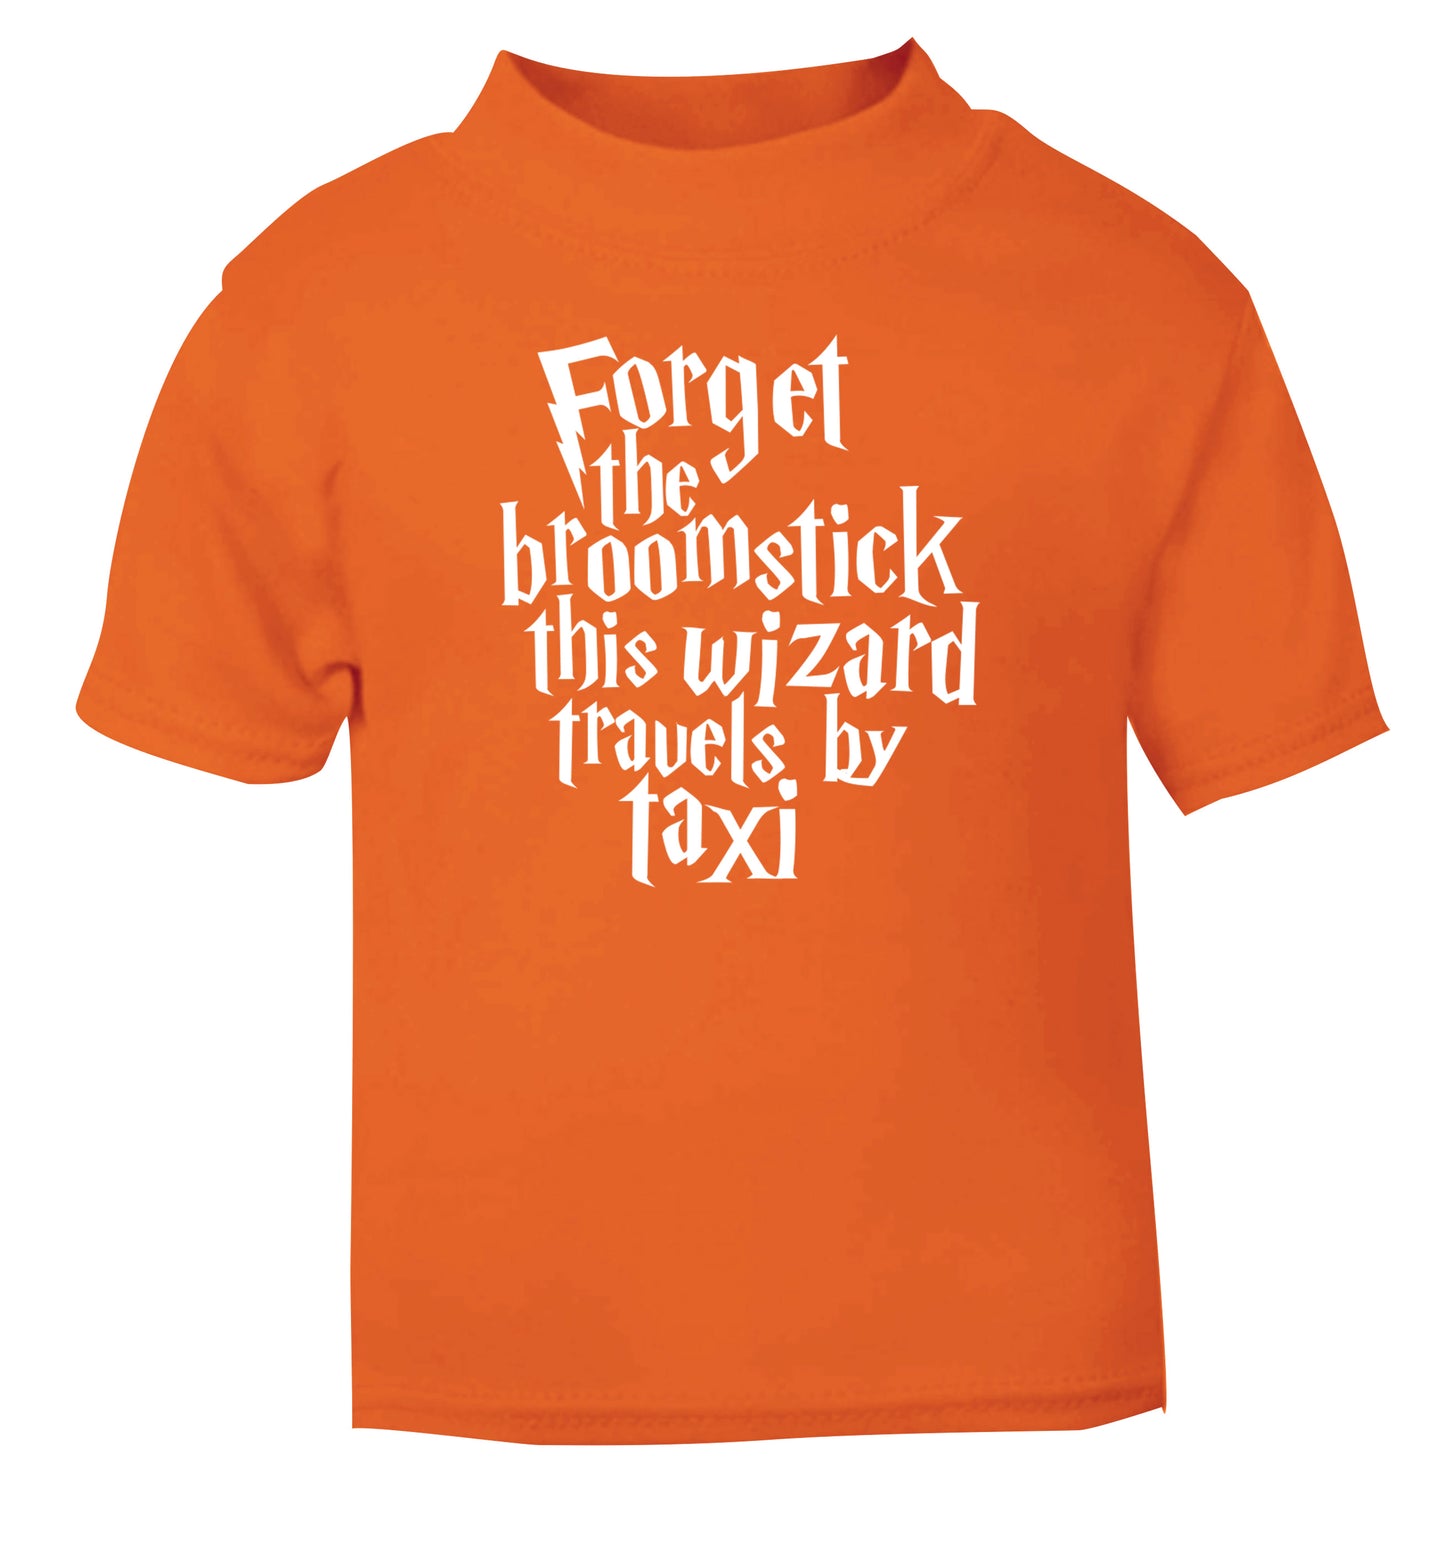 Forget the broomstick this wizard travels by taxi orange Baby Toddler Tshirt 2 Years